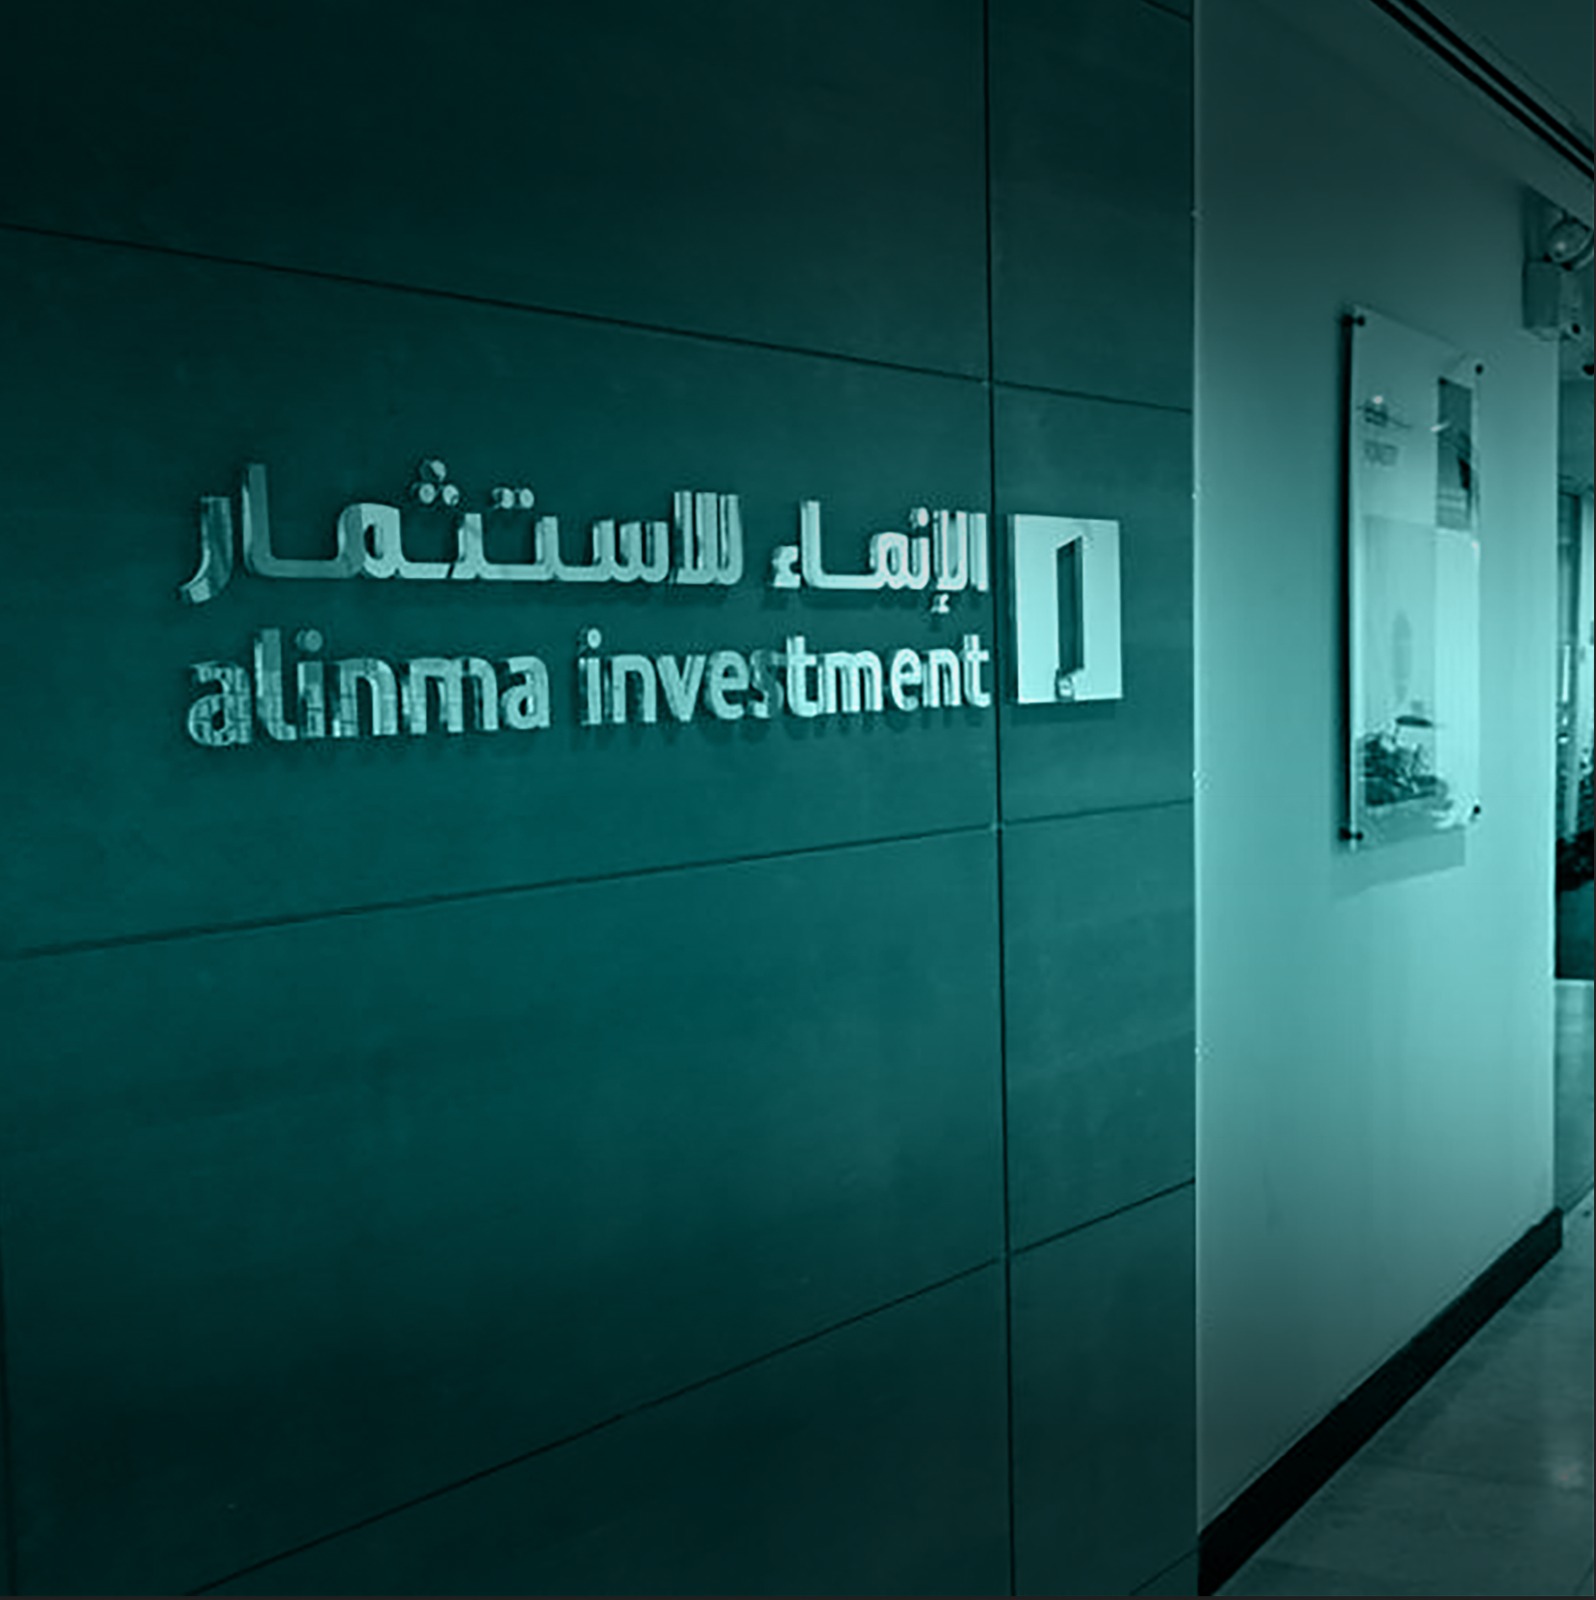 Announcement by Alinma Investment Company that Alinma Saudi Equity Fund annual reports, including the annual audited financial statements, for the period ended on 31/12/2022G are available to the public.